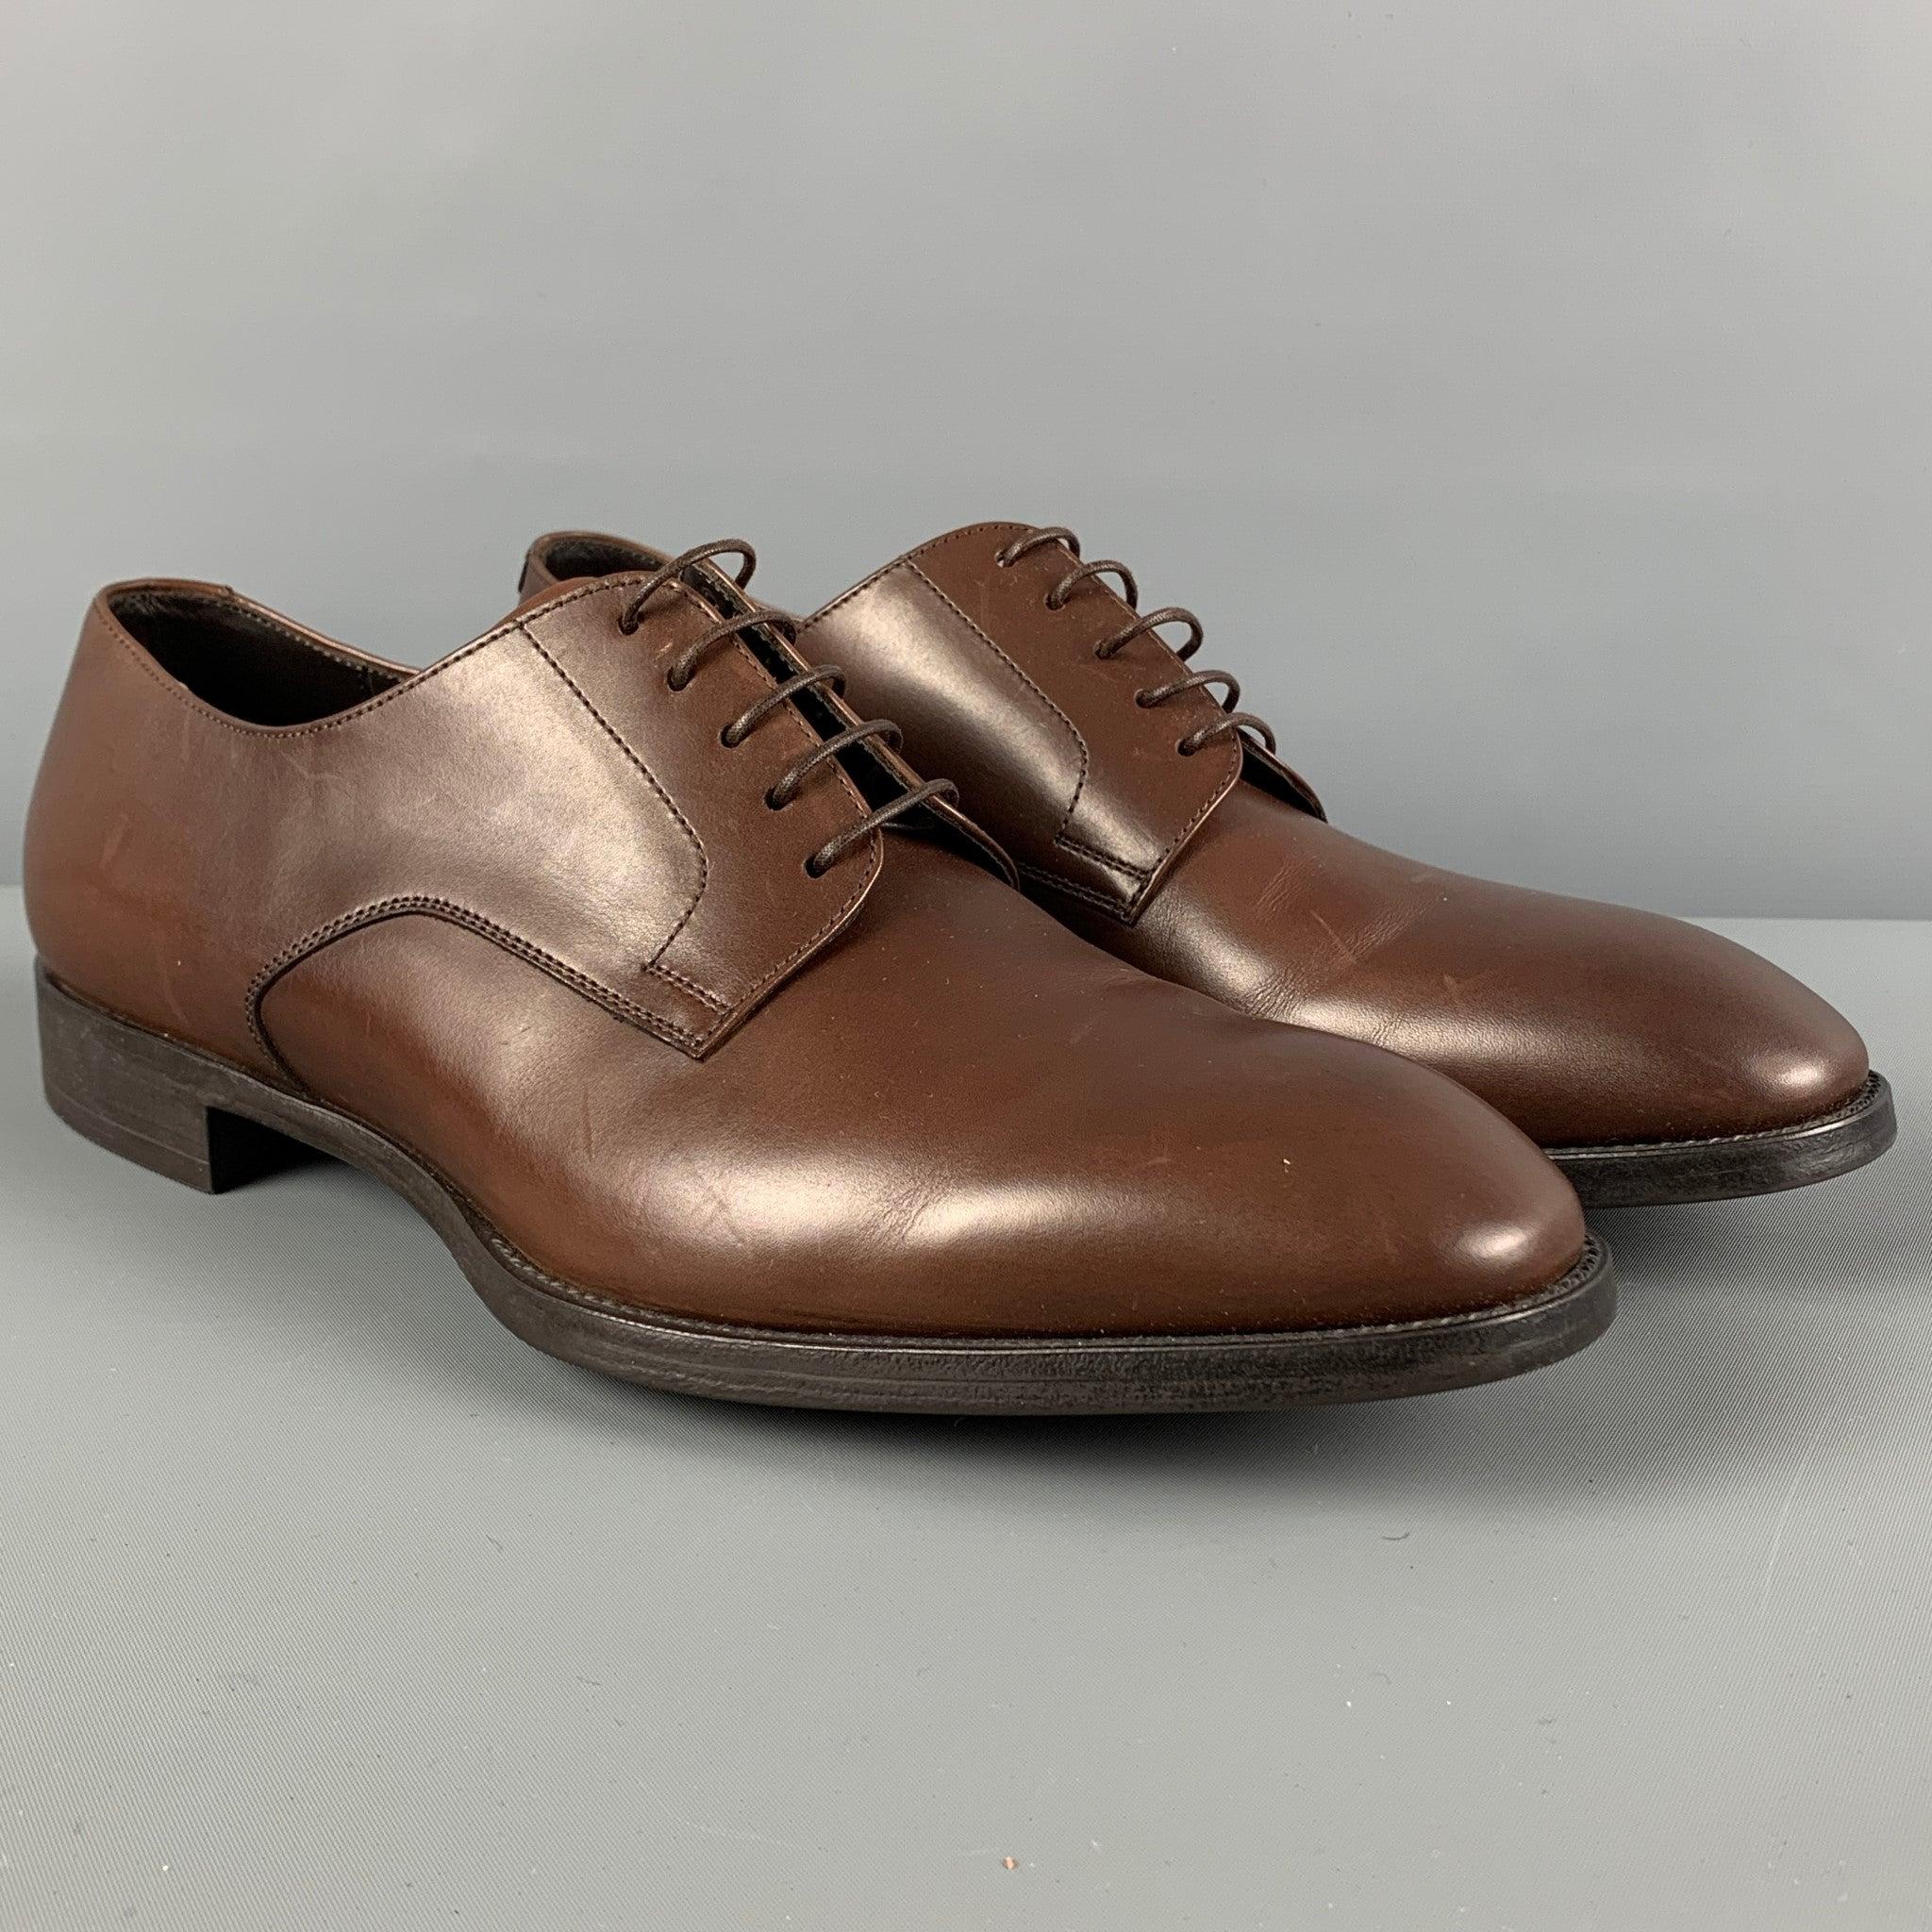 GIORGIO ARMANI shoes comes in a brown leather featuring a classic style and a lace up closure. Made in Italy.
Very Good
Pre-Owned Condition. 

Marked:   X2C536 9Outsole: 12 inches  x 4.25 inches 
  
  
 
Reference: 122257
Category: Lace Up